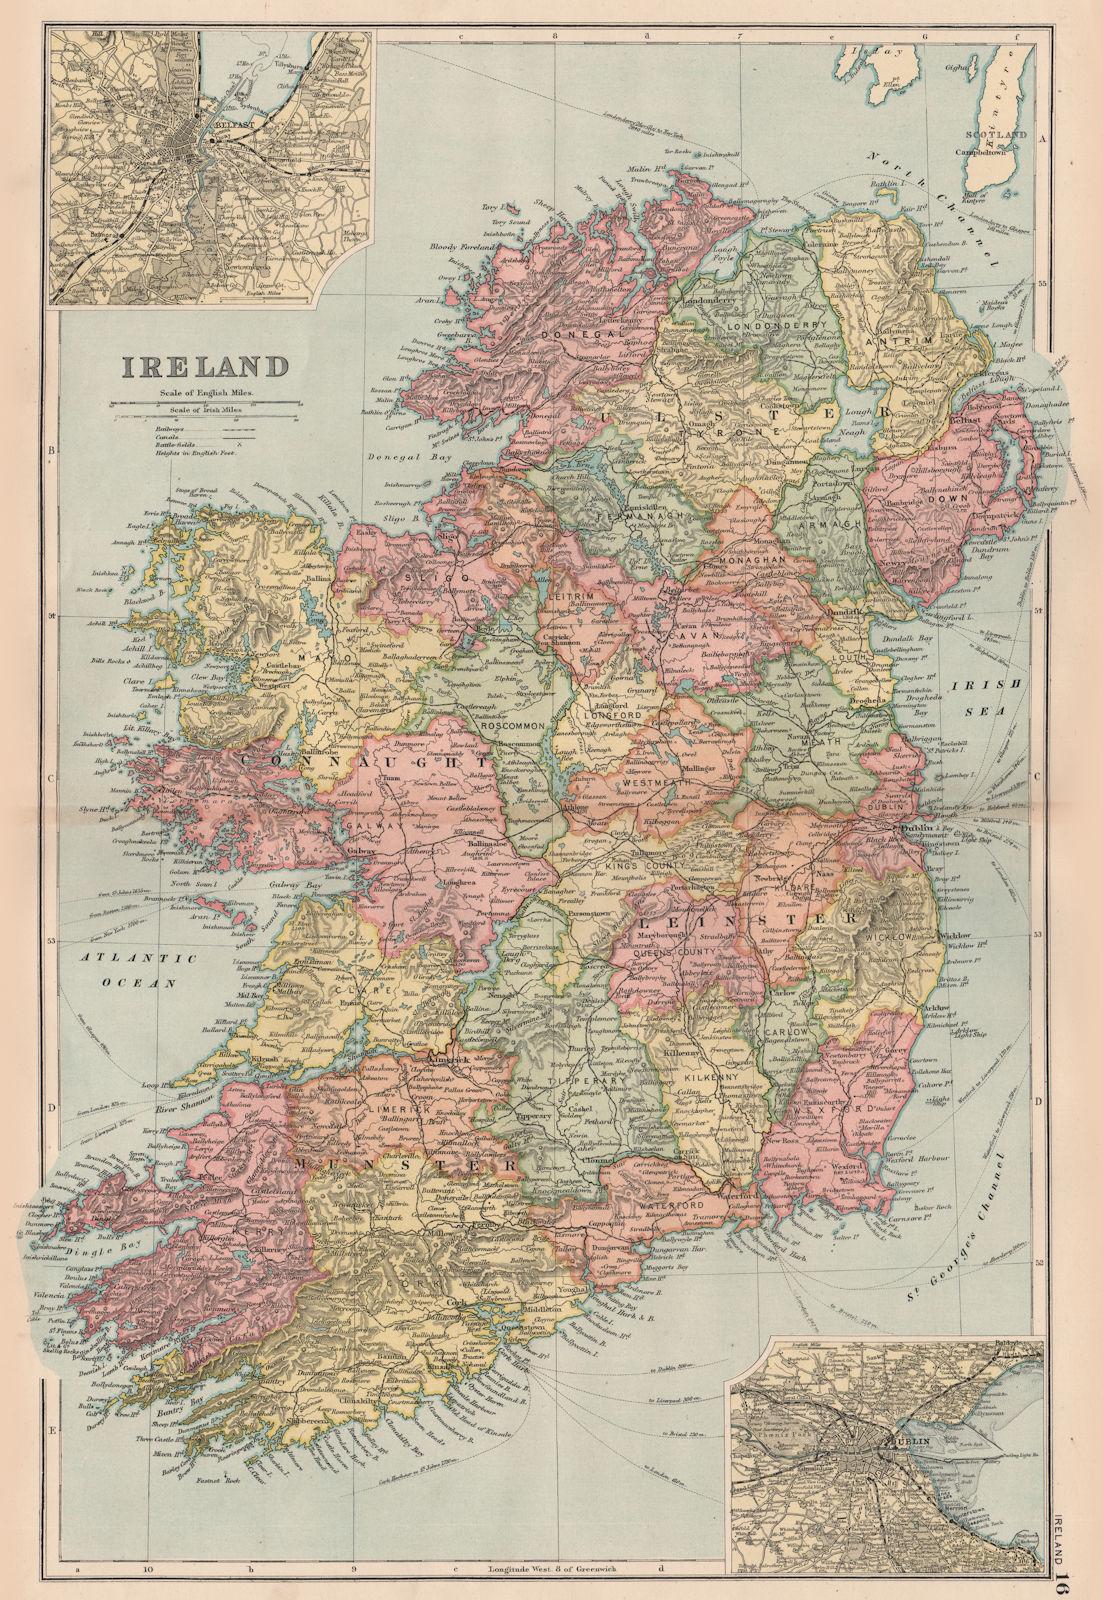 IRELAND. Showing counties. Inset Belfast & Dublin. BACON 1893 old antique map